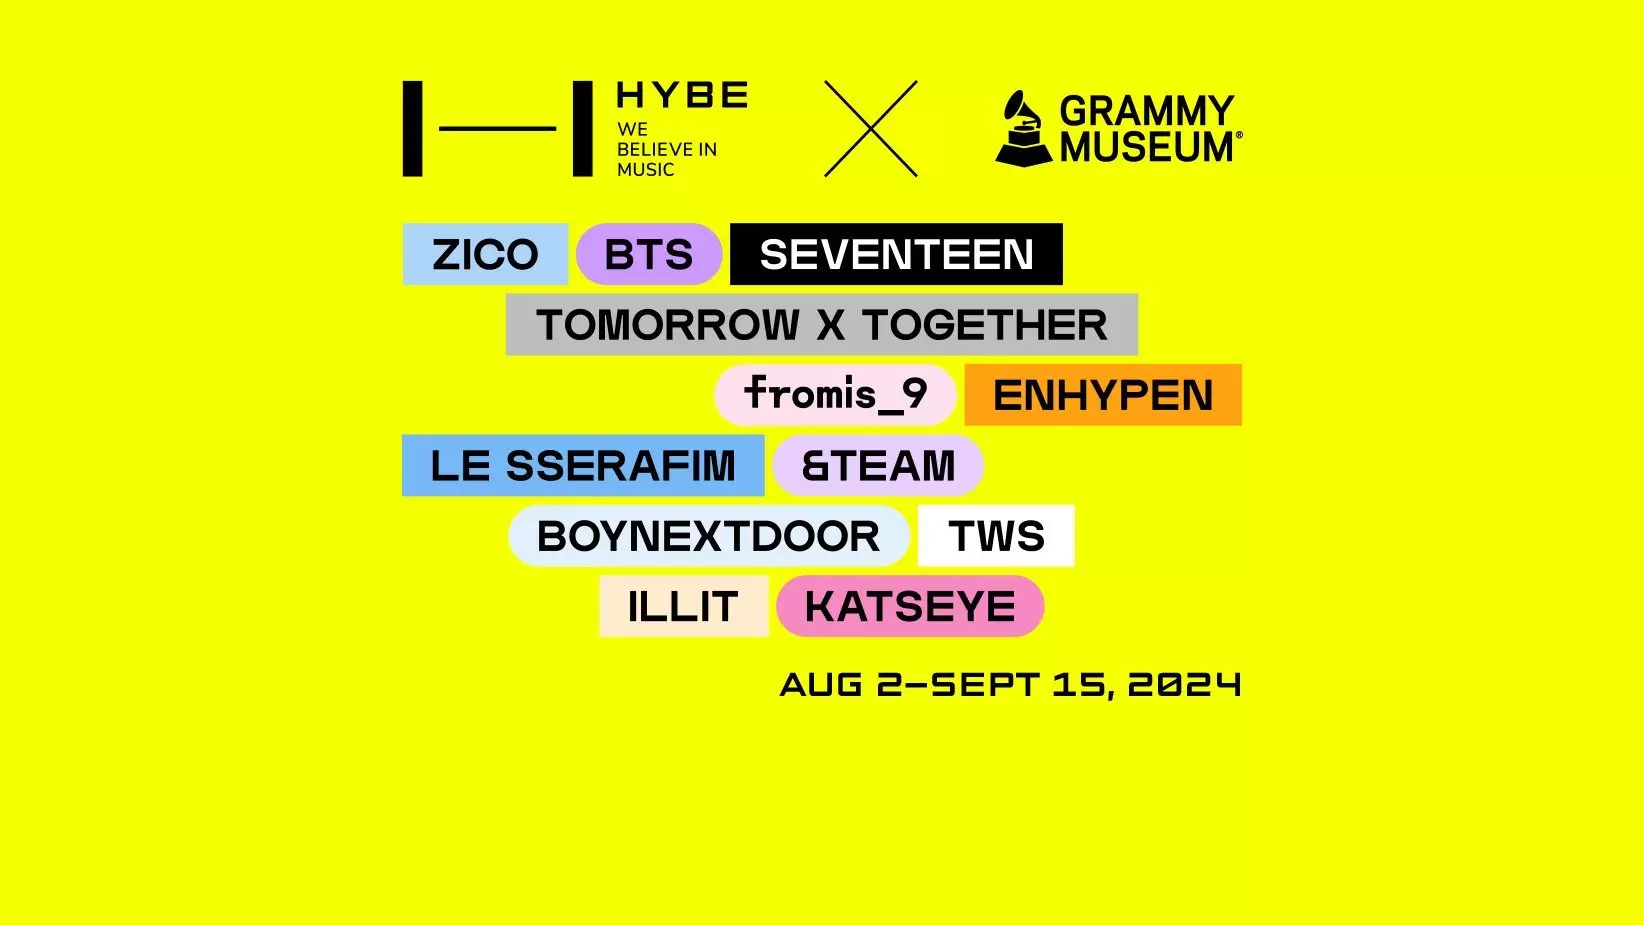 GRAMMY Museum Partners With HYBE For New K-Pop Exhibit 'HYBE: We Believe In Music' Opening Aug. 2